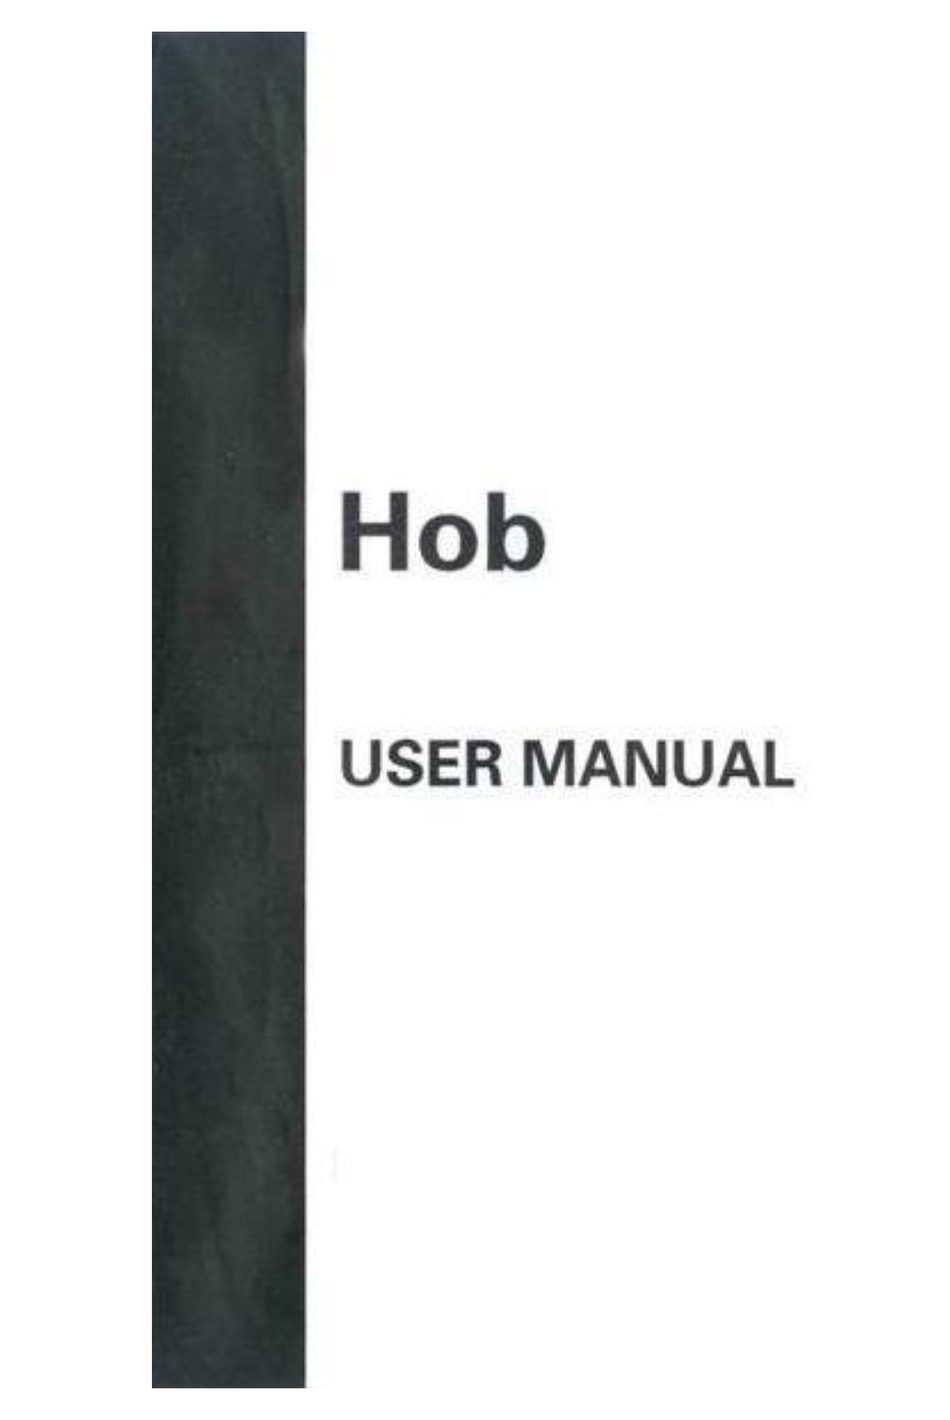 User manual Fagor 976010397 (English - 112 pages)